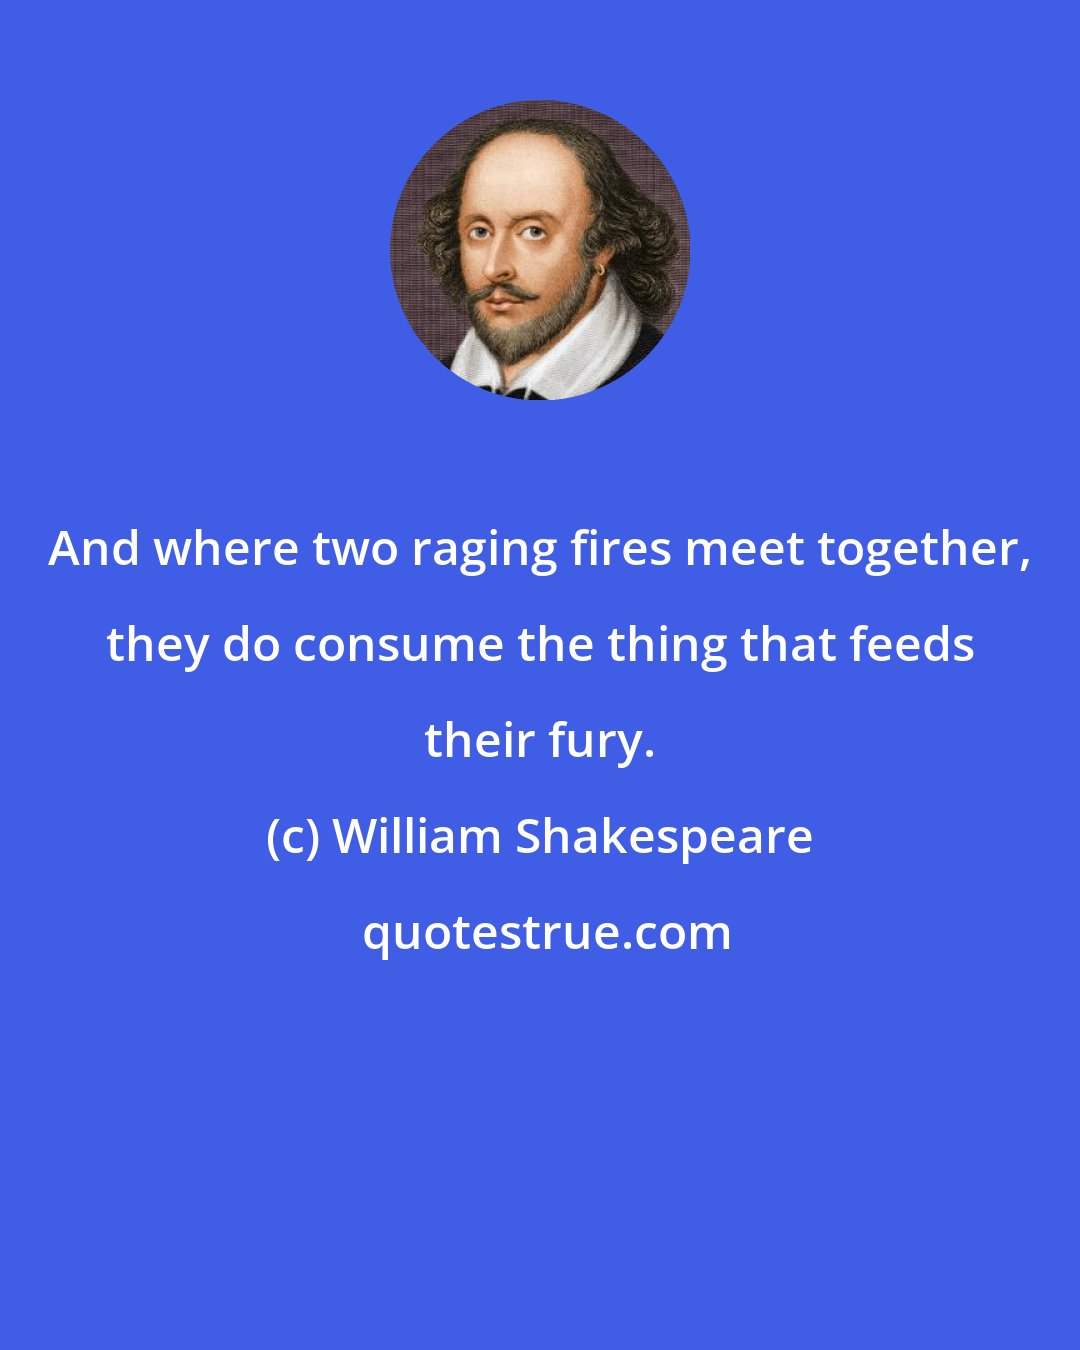 William Shakespeare: And where two raging fires meet together, they do consume the thing that feeds their fury.